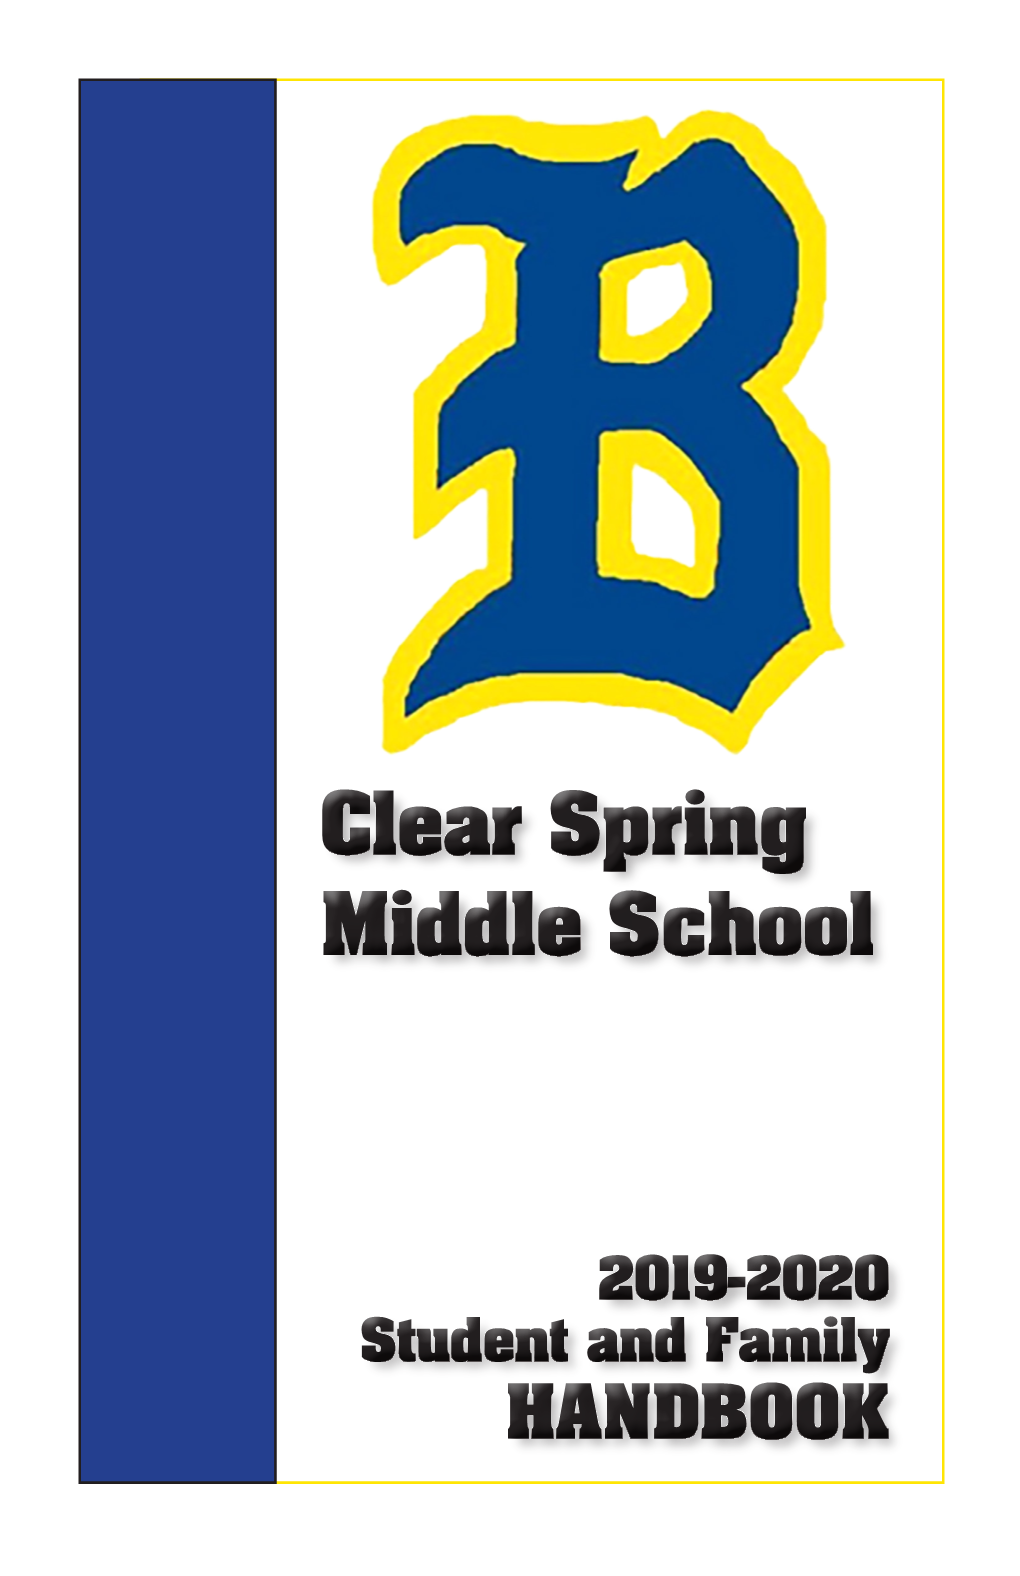 CLEAR SPRING MIDDLE SCHOOL STUDENT and FAMILY HANDBOOK 12628 Broadfording Road • Clear Spring, MD 21722